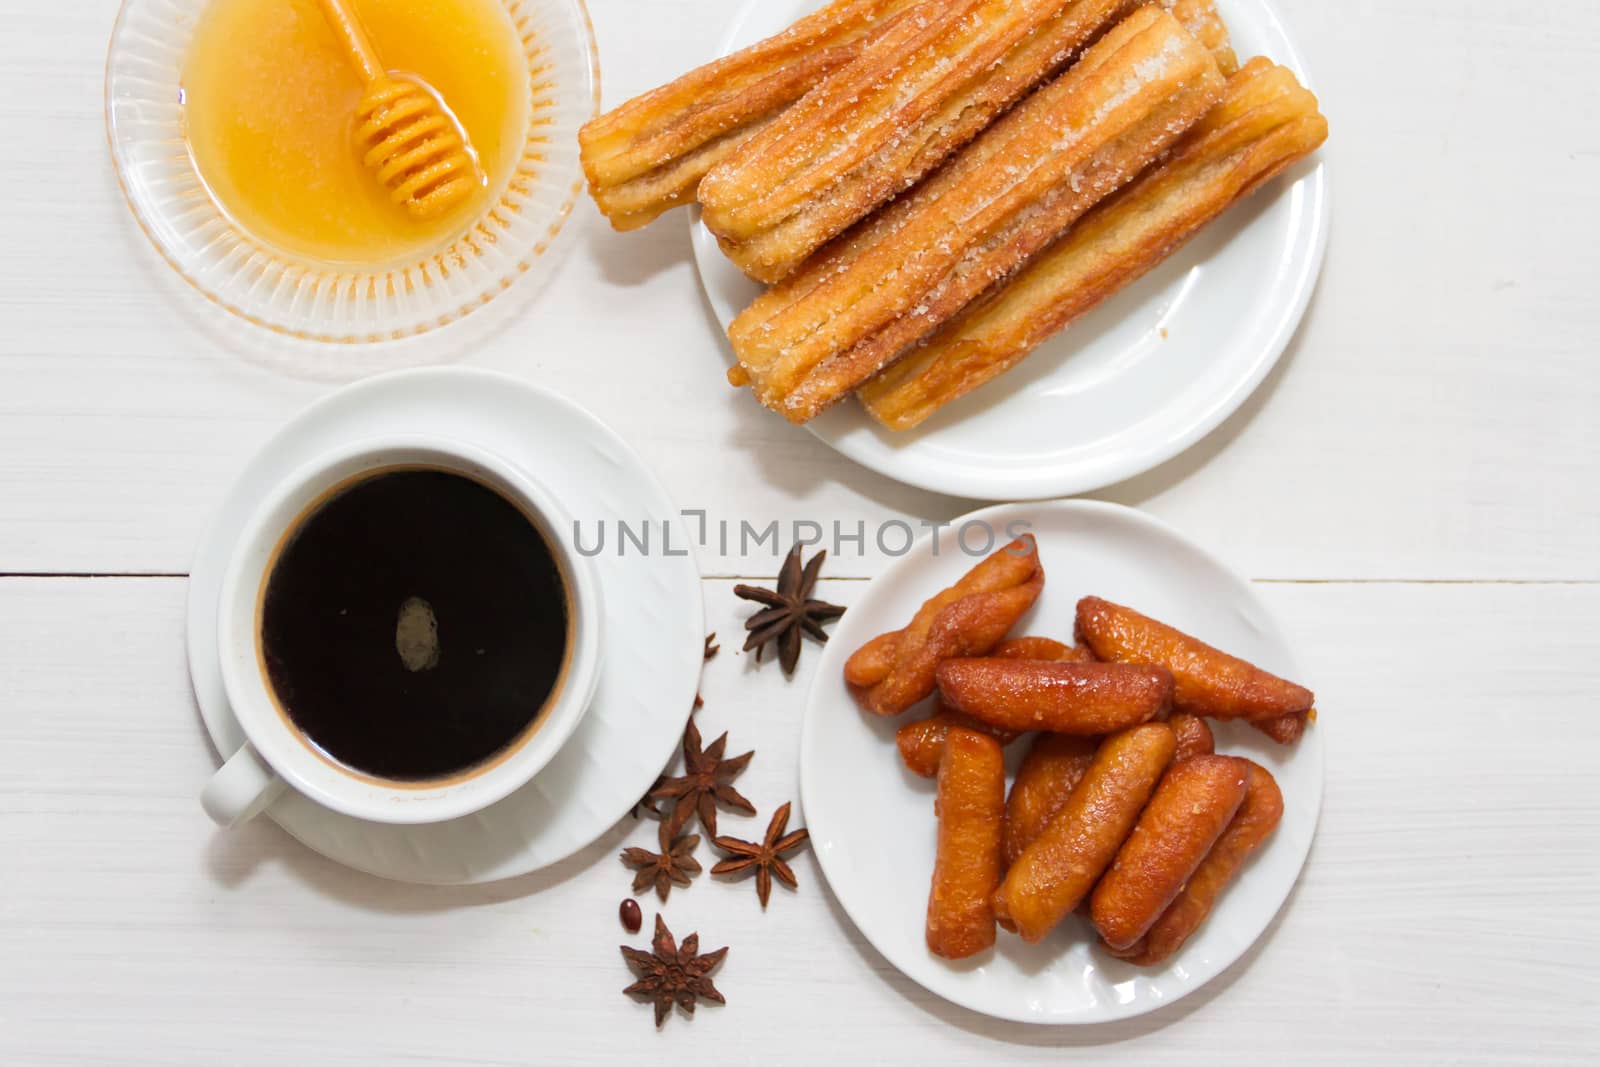 pestiños with honey anis and oporto typical gastronomy of andalucia